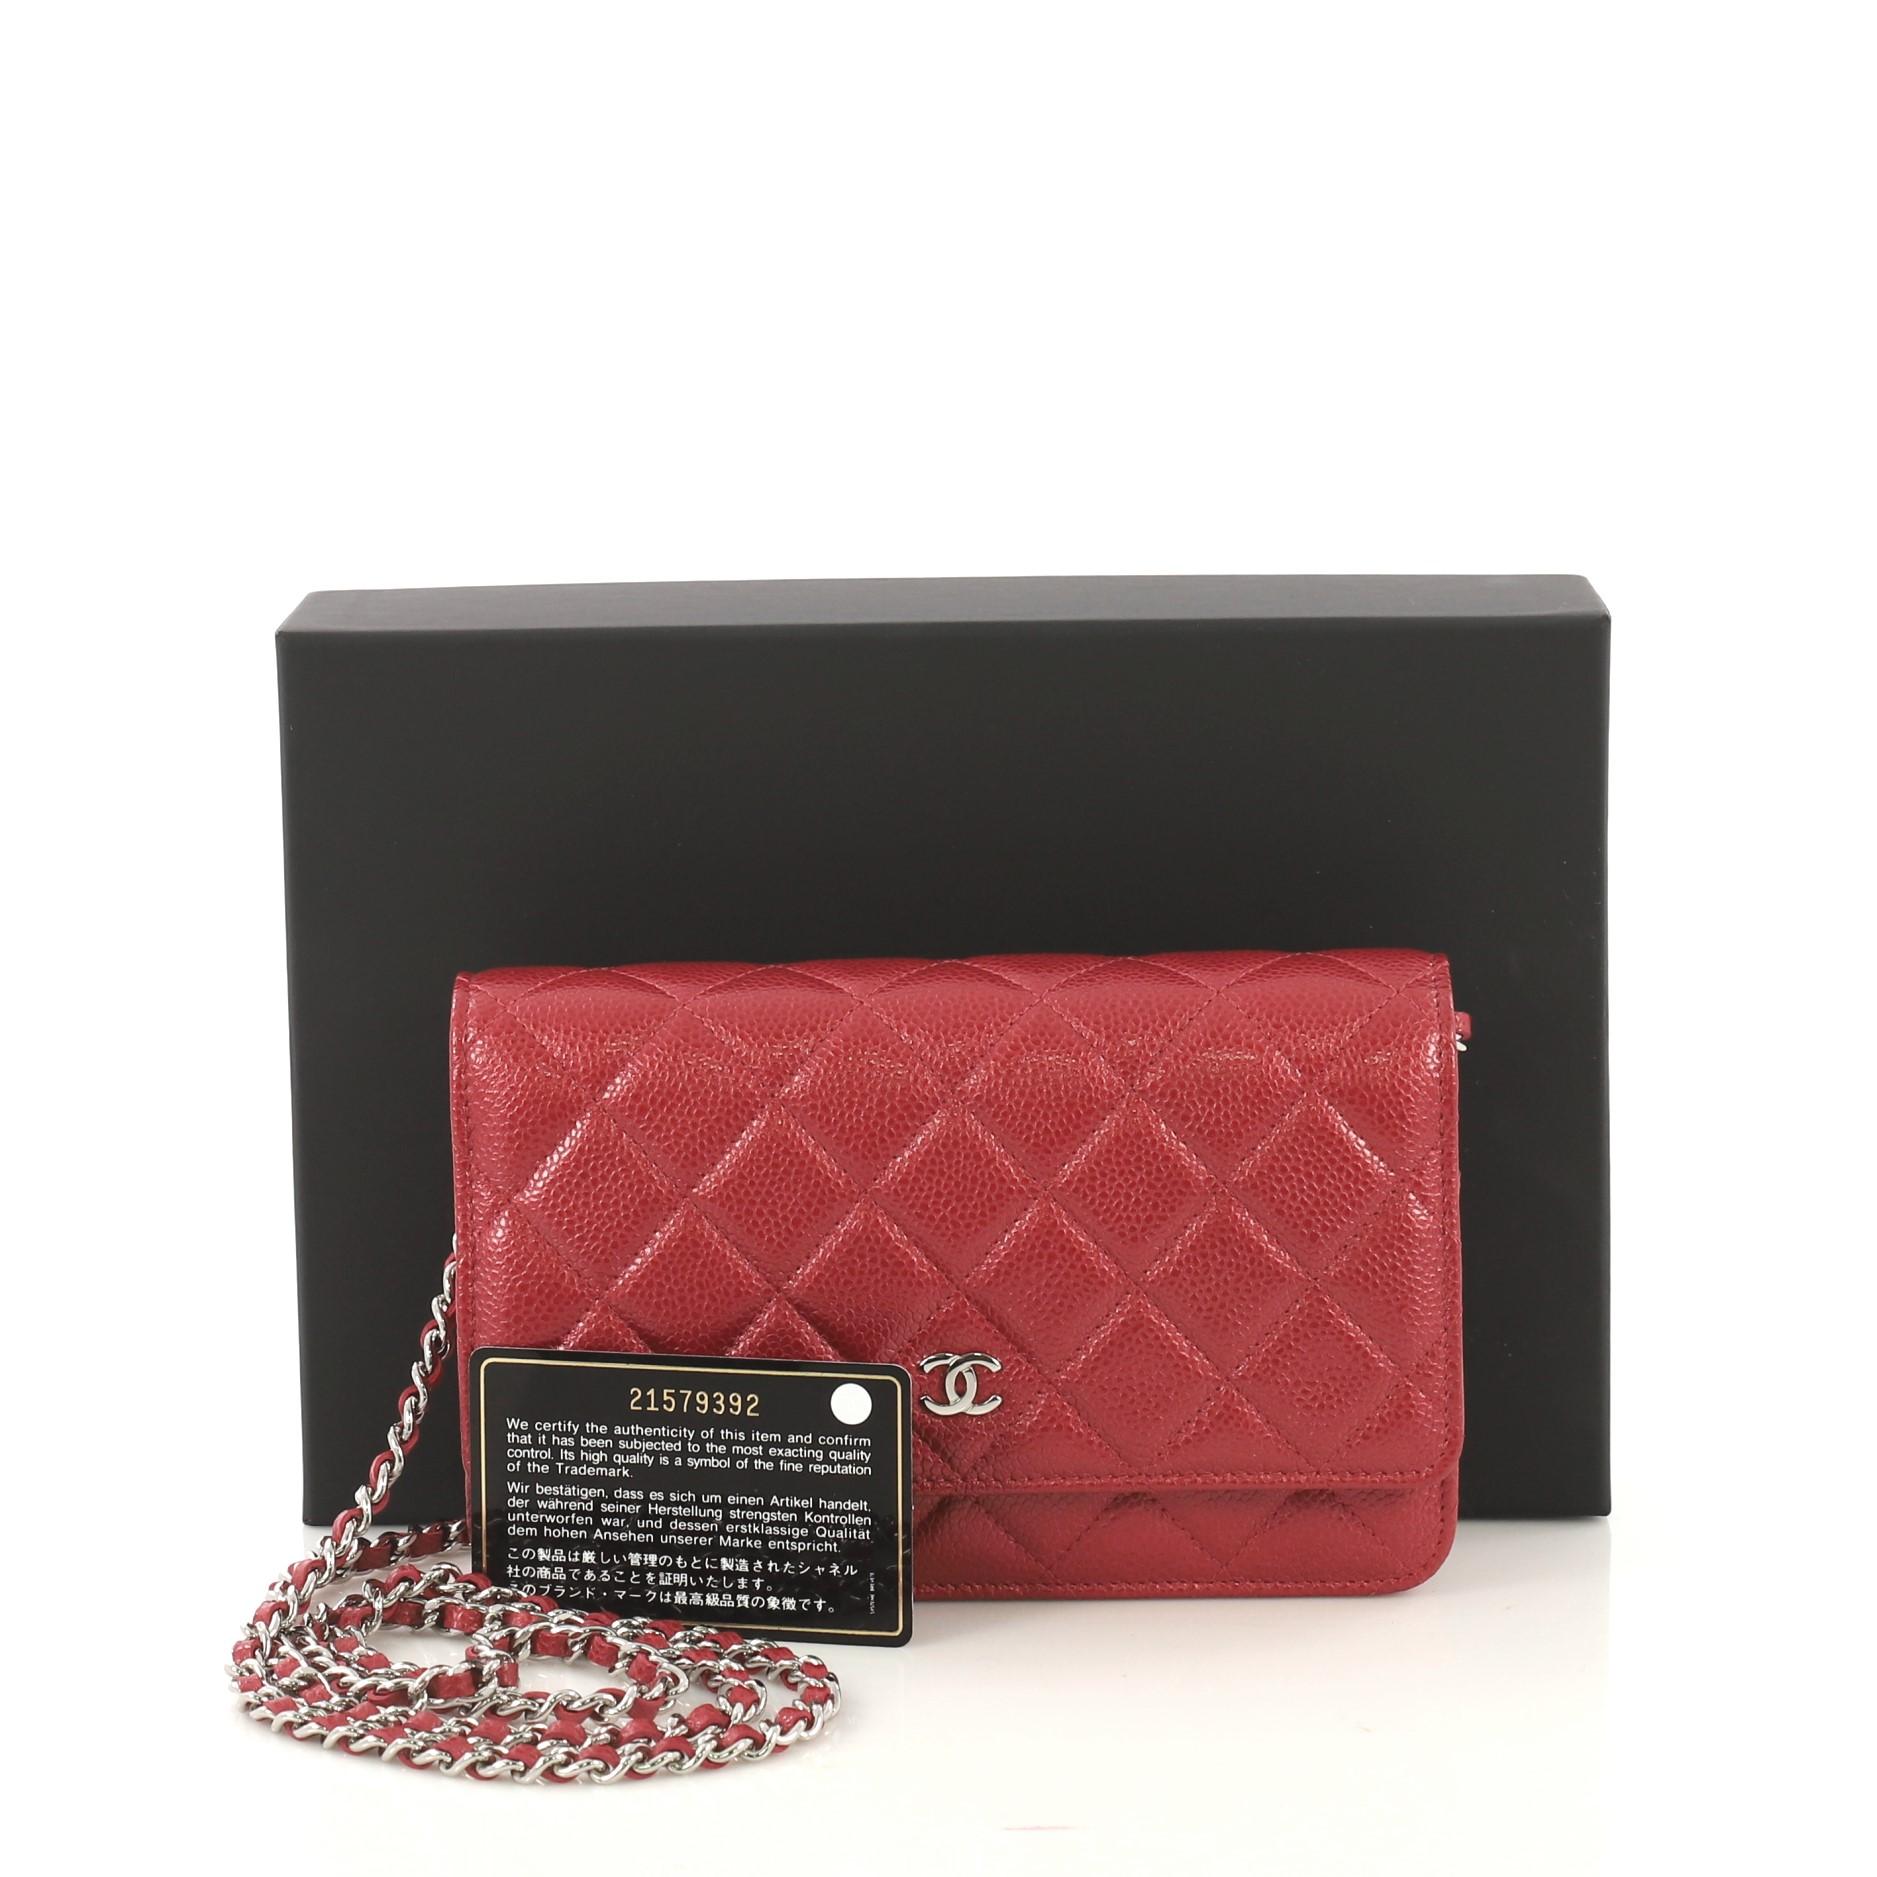 This Chanel Wallet on Chain Quilted Caviar, crafted in red quilted caviar leather, features woven-in leather chain strap, front flap with CC logo, exterior back slip pocket, and silver-tone hardware. Its magnetic snap button closure opens to a red